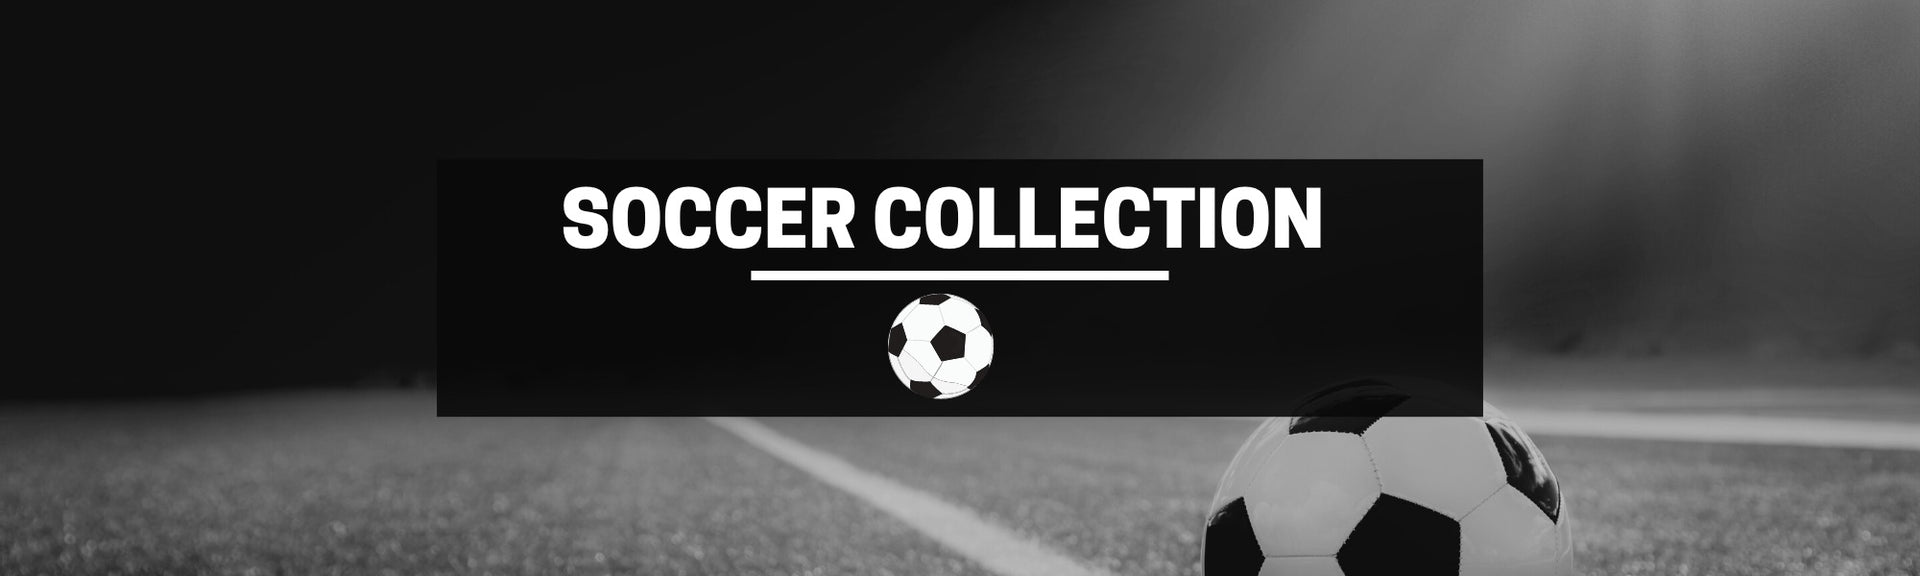 Soccer Collection